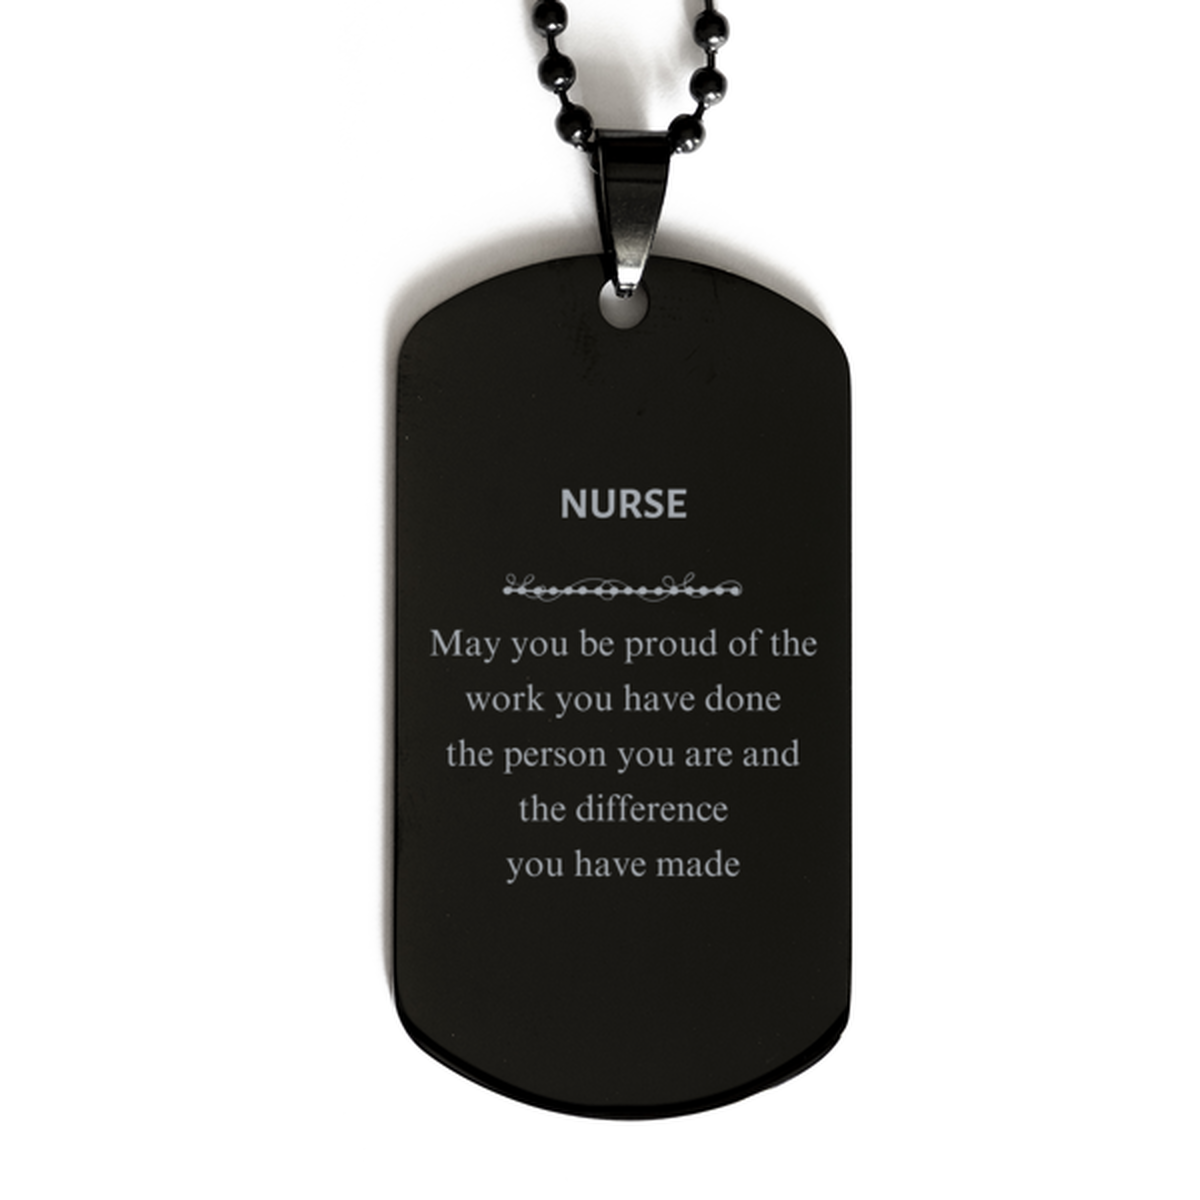 Nurse May you be proud of the work you have done, Retirement Nurse Black Dog Tag for Colleague Appreciation Gifts Amazing for Nurse